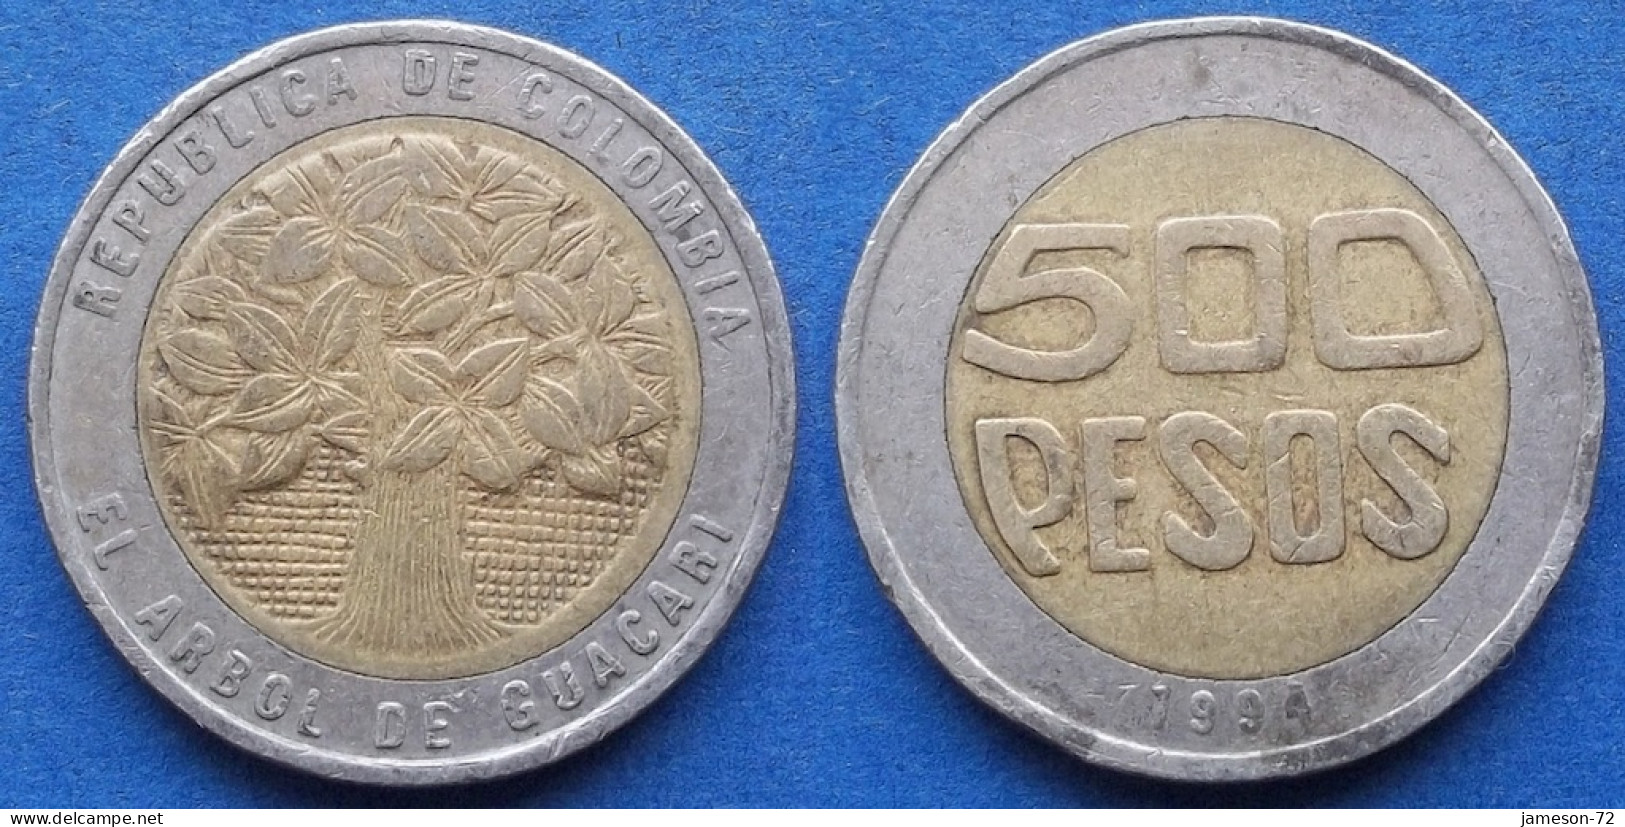 COLOMBIA - 500 Pesos 1994 "Guacari Tree" KM# 286 Republic - Edelweiss Coins - Colombia